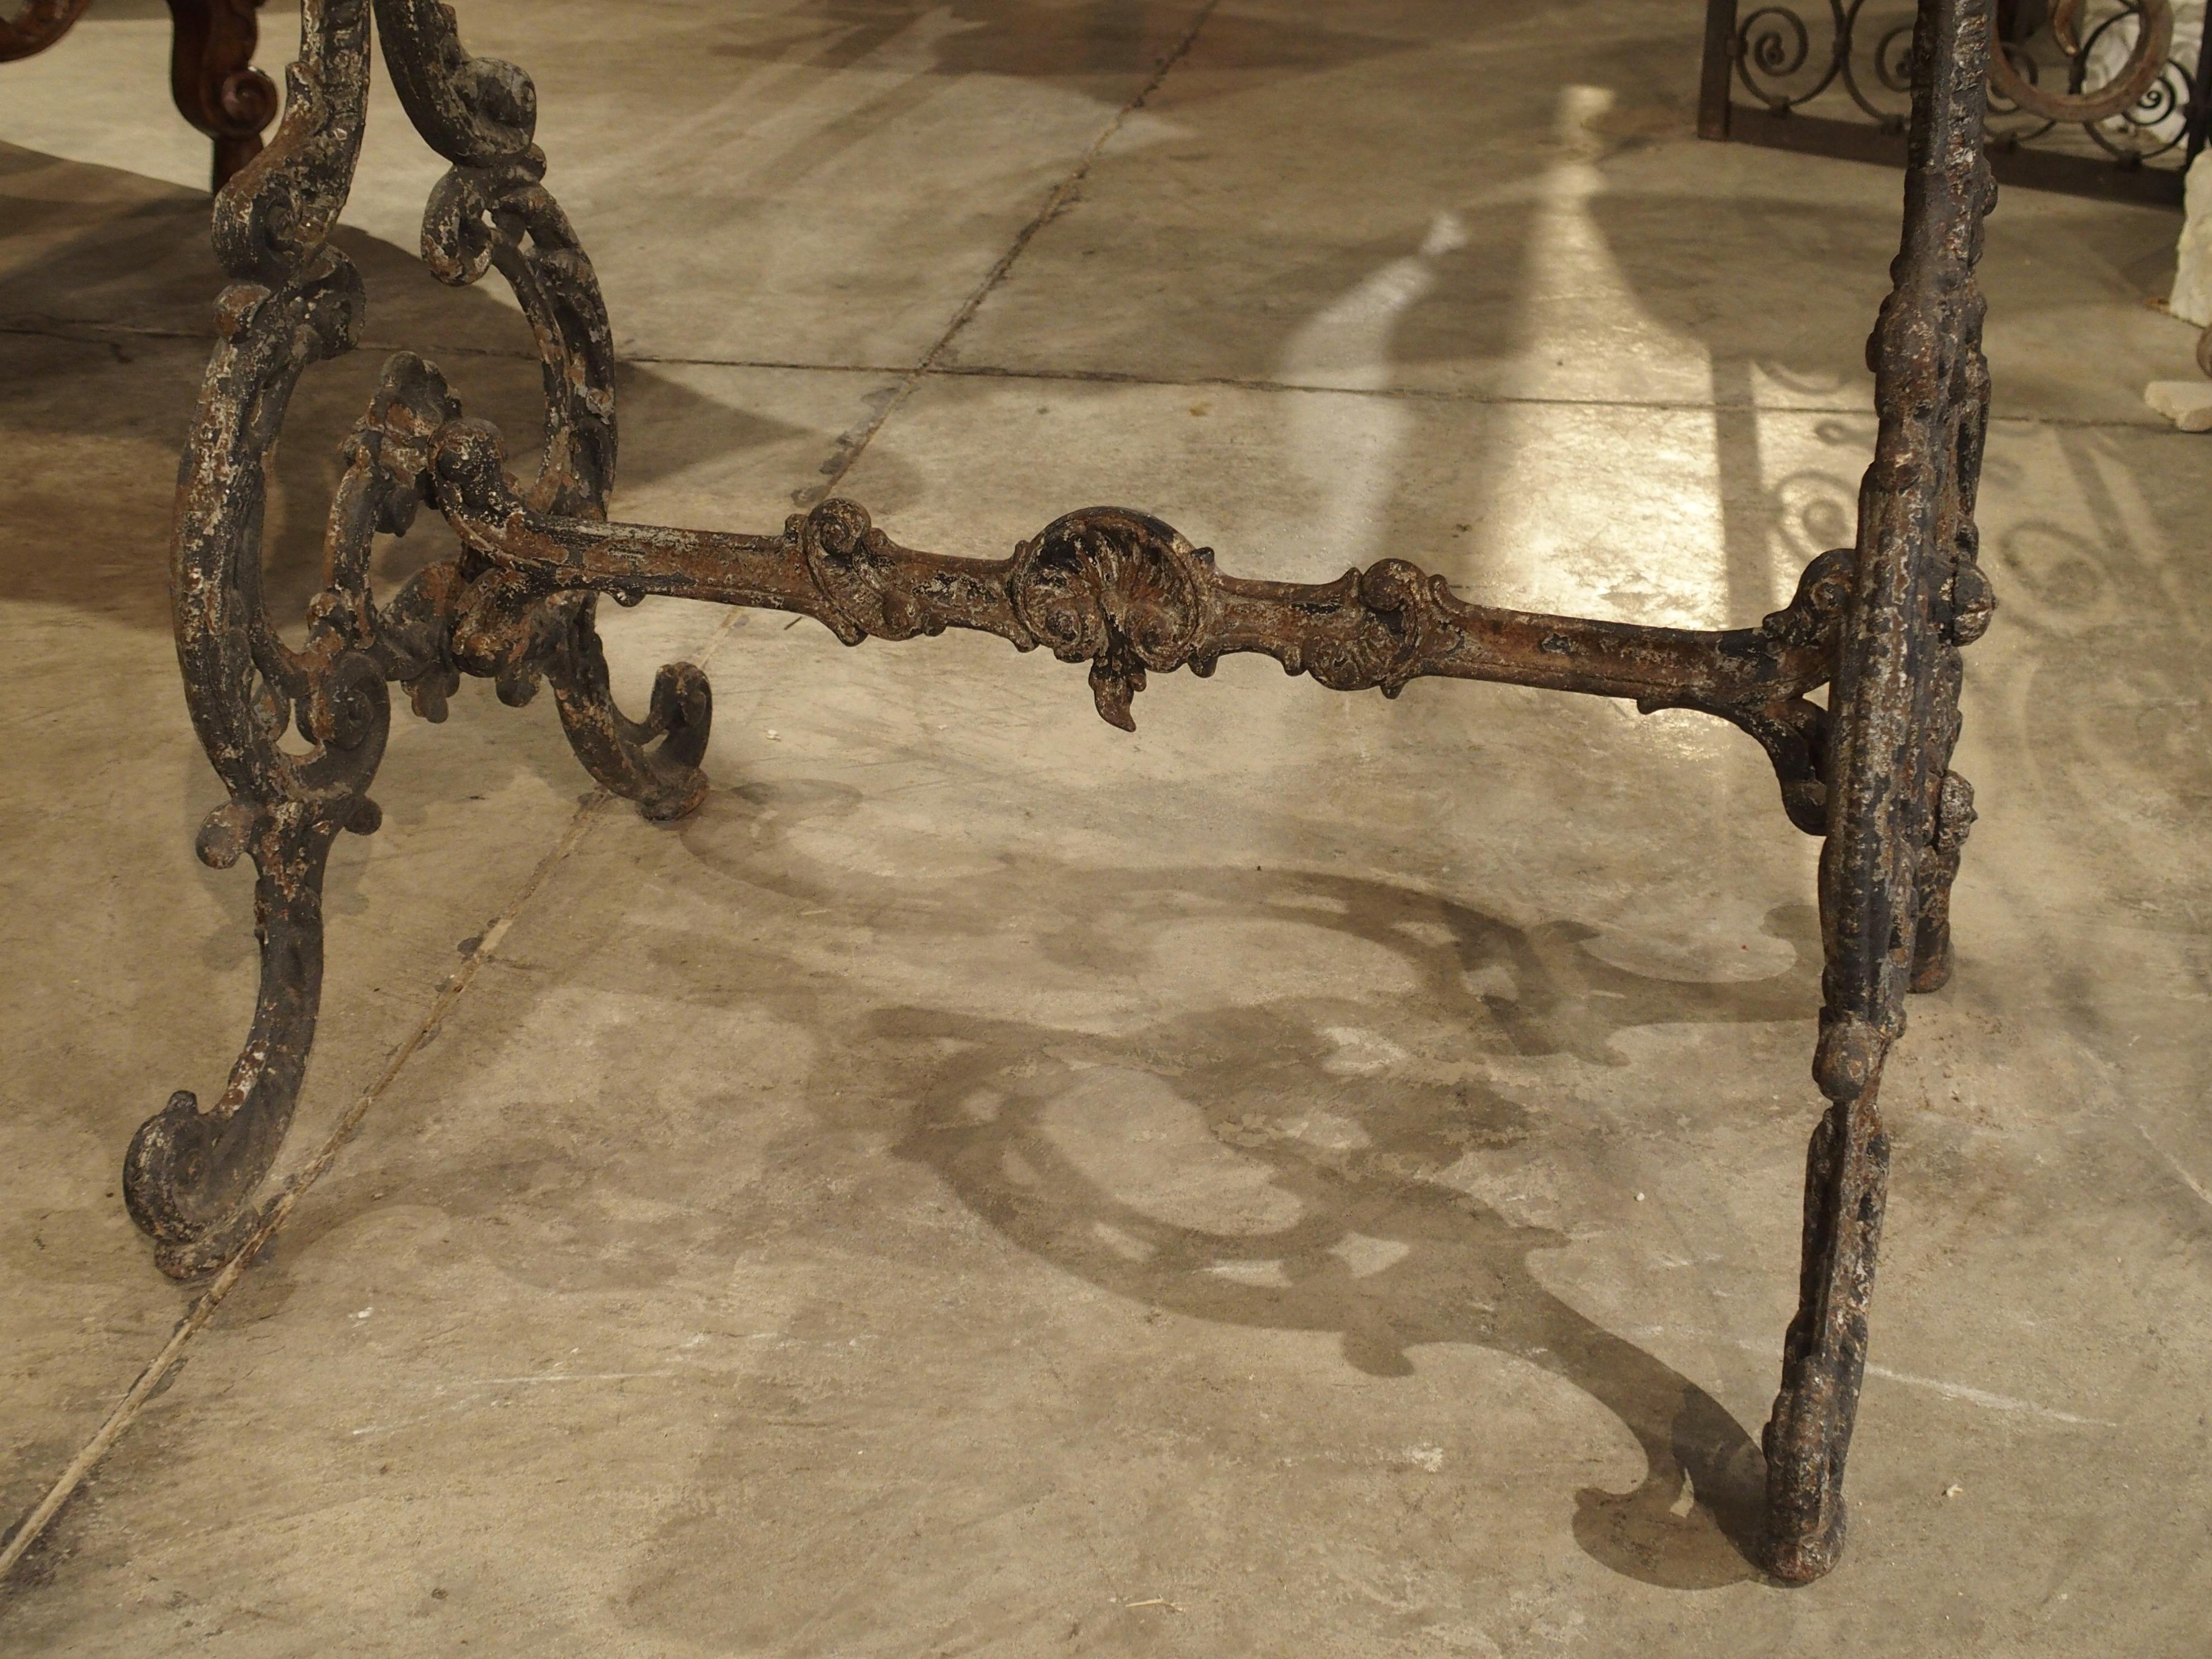 This beautifully designed antique iron garden table with marble top has thickly cast, but intricate designs to its ironwork. There are several variations of acanthus leaf C and S scrolls, along with shells making up the base of the table. It is not